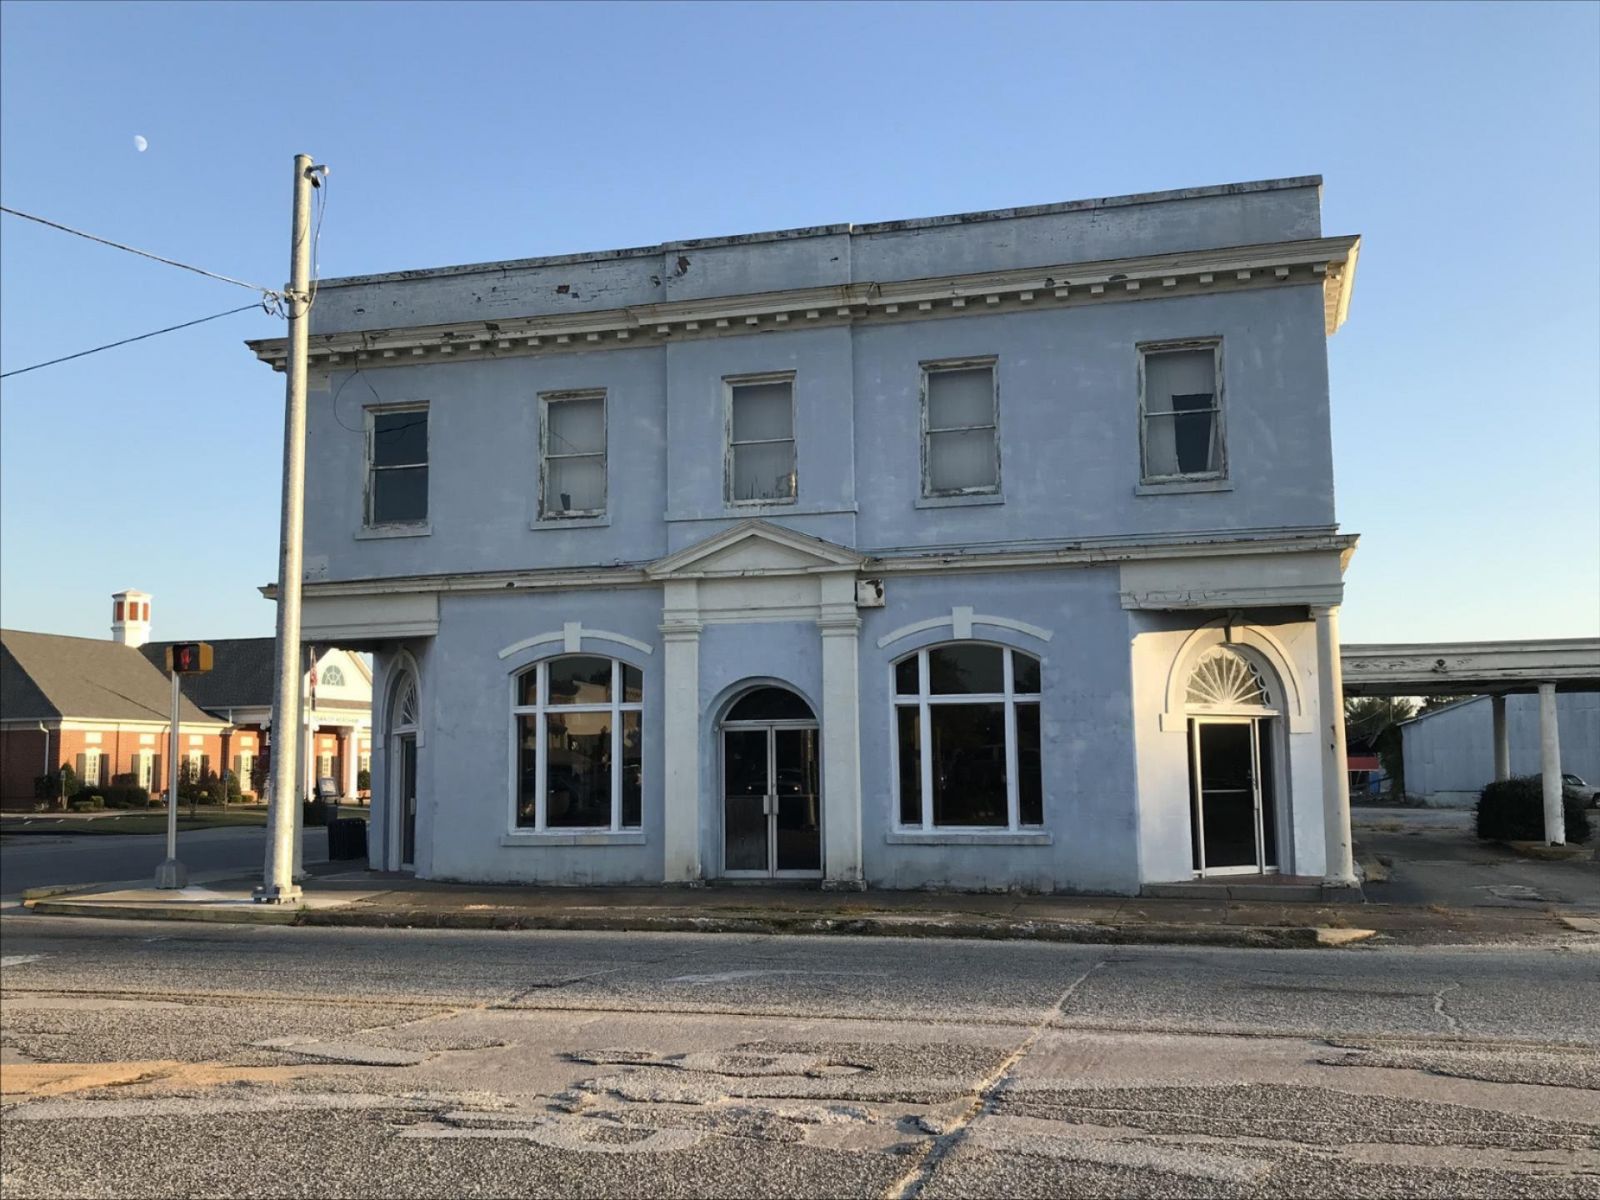 The town of Kershaw will use its $600,000 grant to renovate a historic downtown building into an early education center. (Photo/Provided)